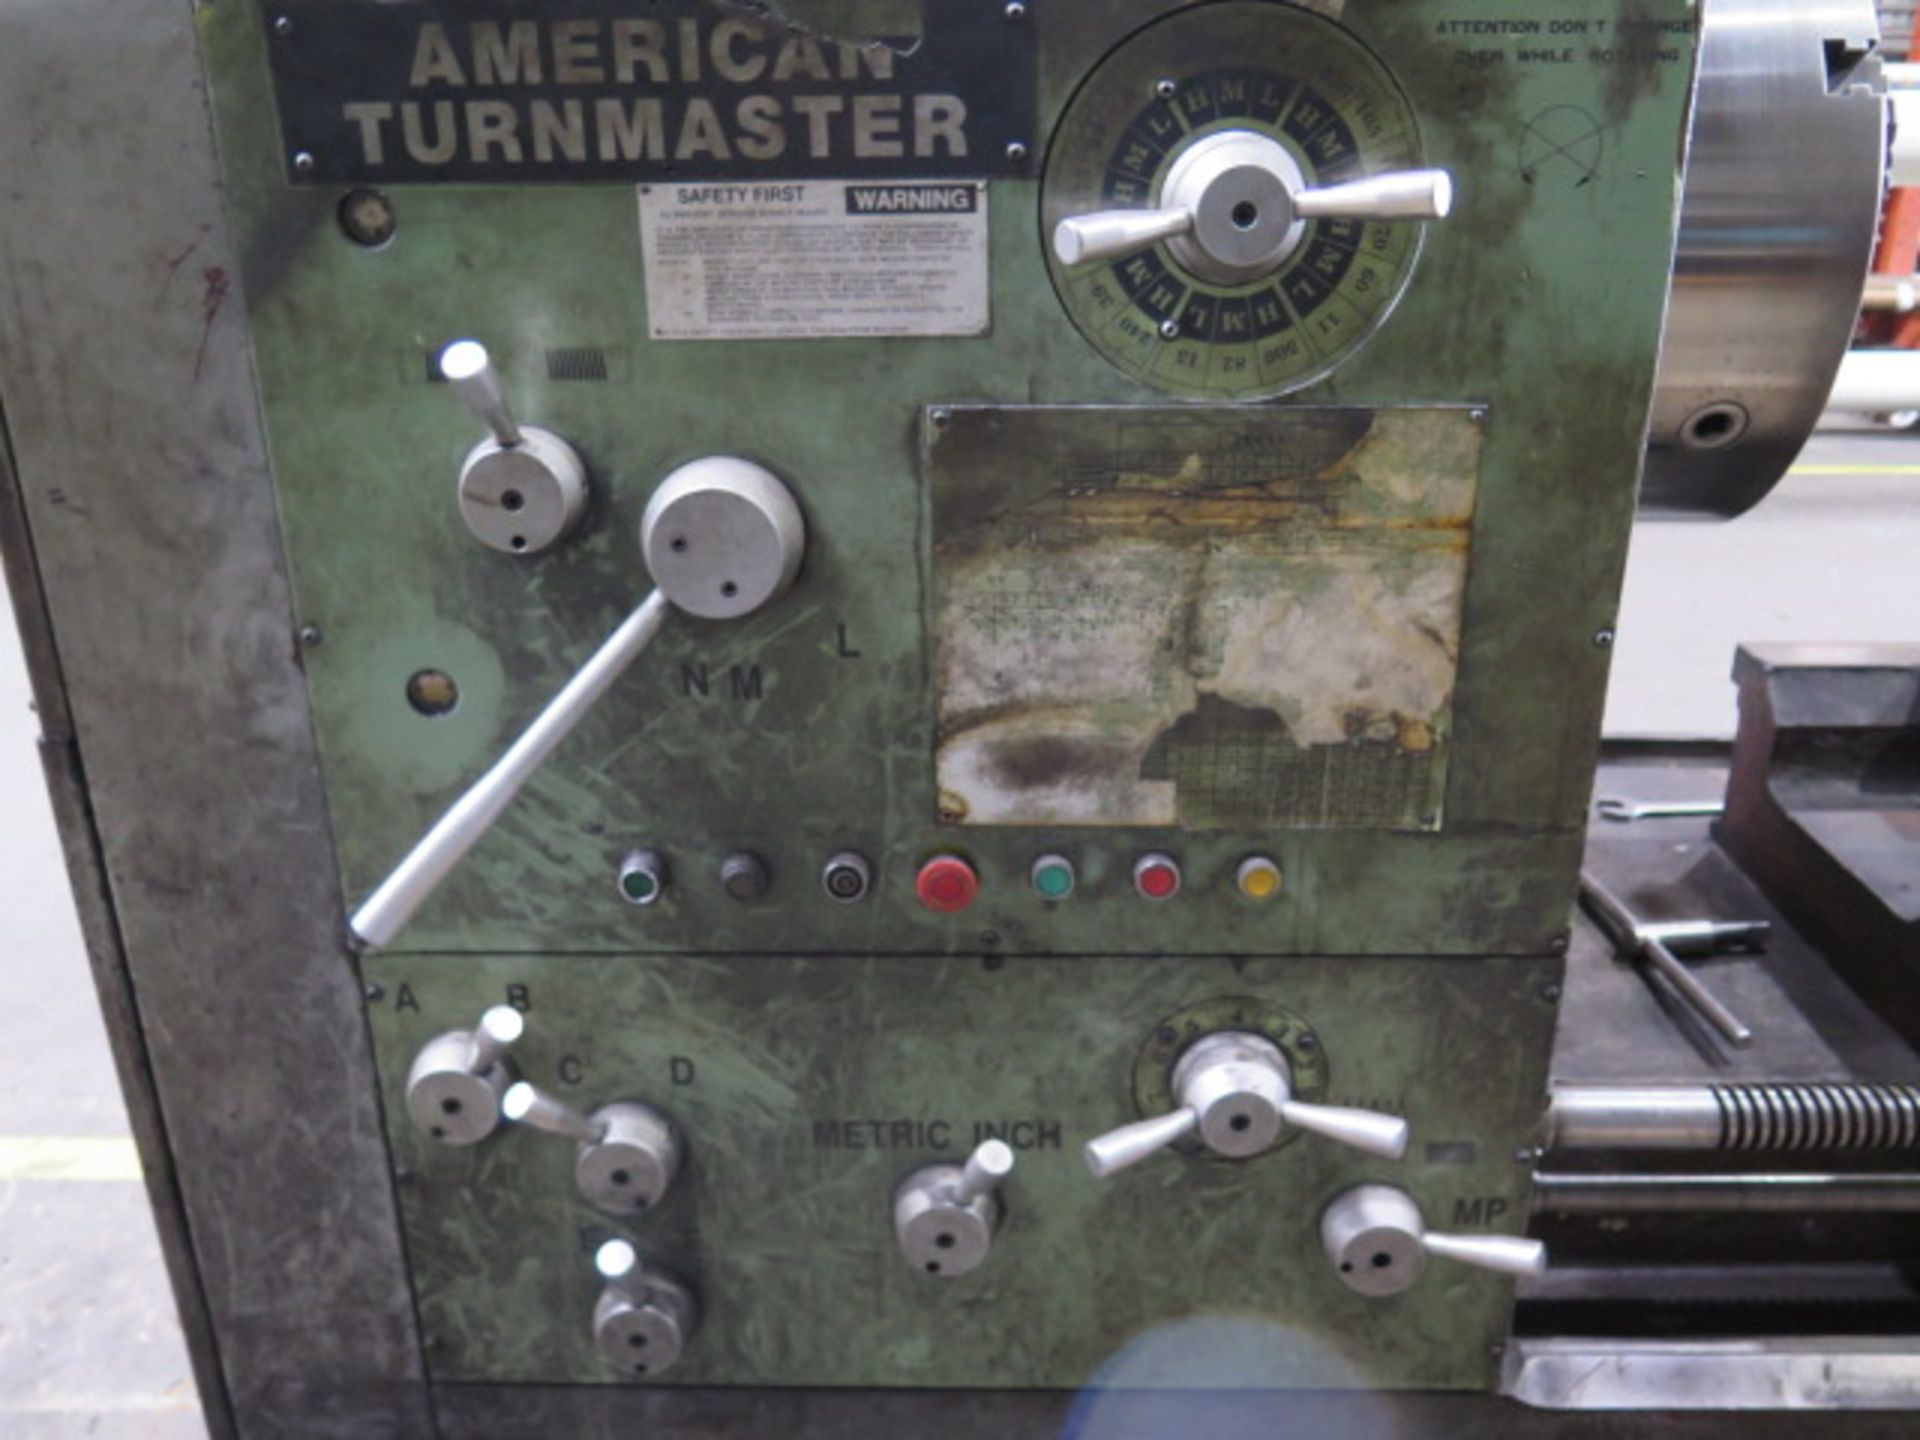 American Turnmaster HT-3580 35” x 80” Big Bore Geared Gap Bed Lathe w/ 6” Spindle Bore, SOLD AS IS - Image 5 of 15